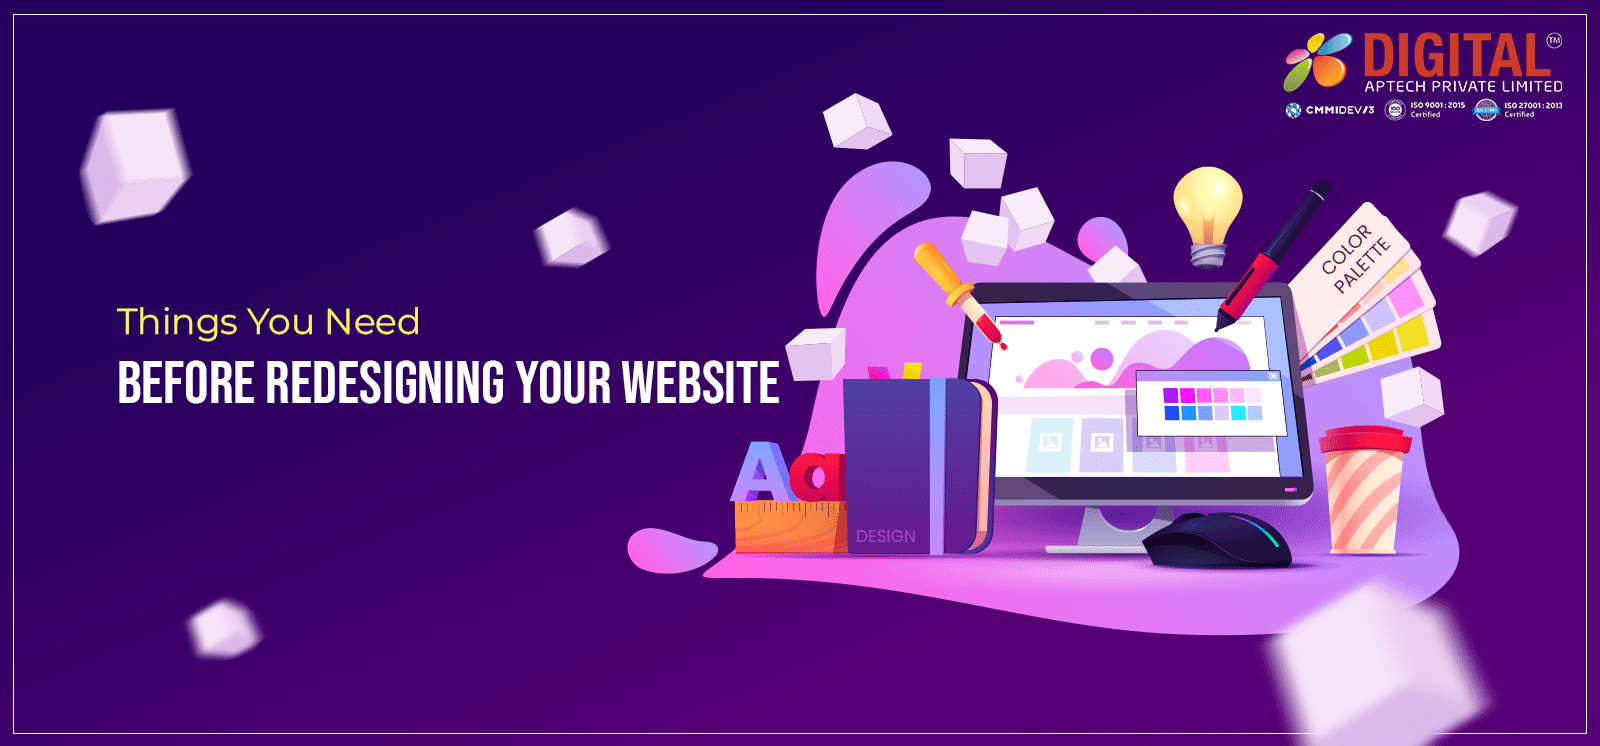 Things You Need Before Redesigning Your Website